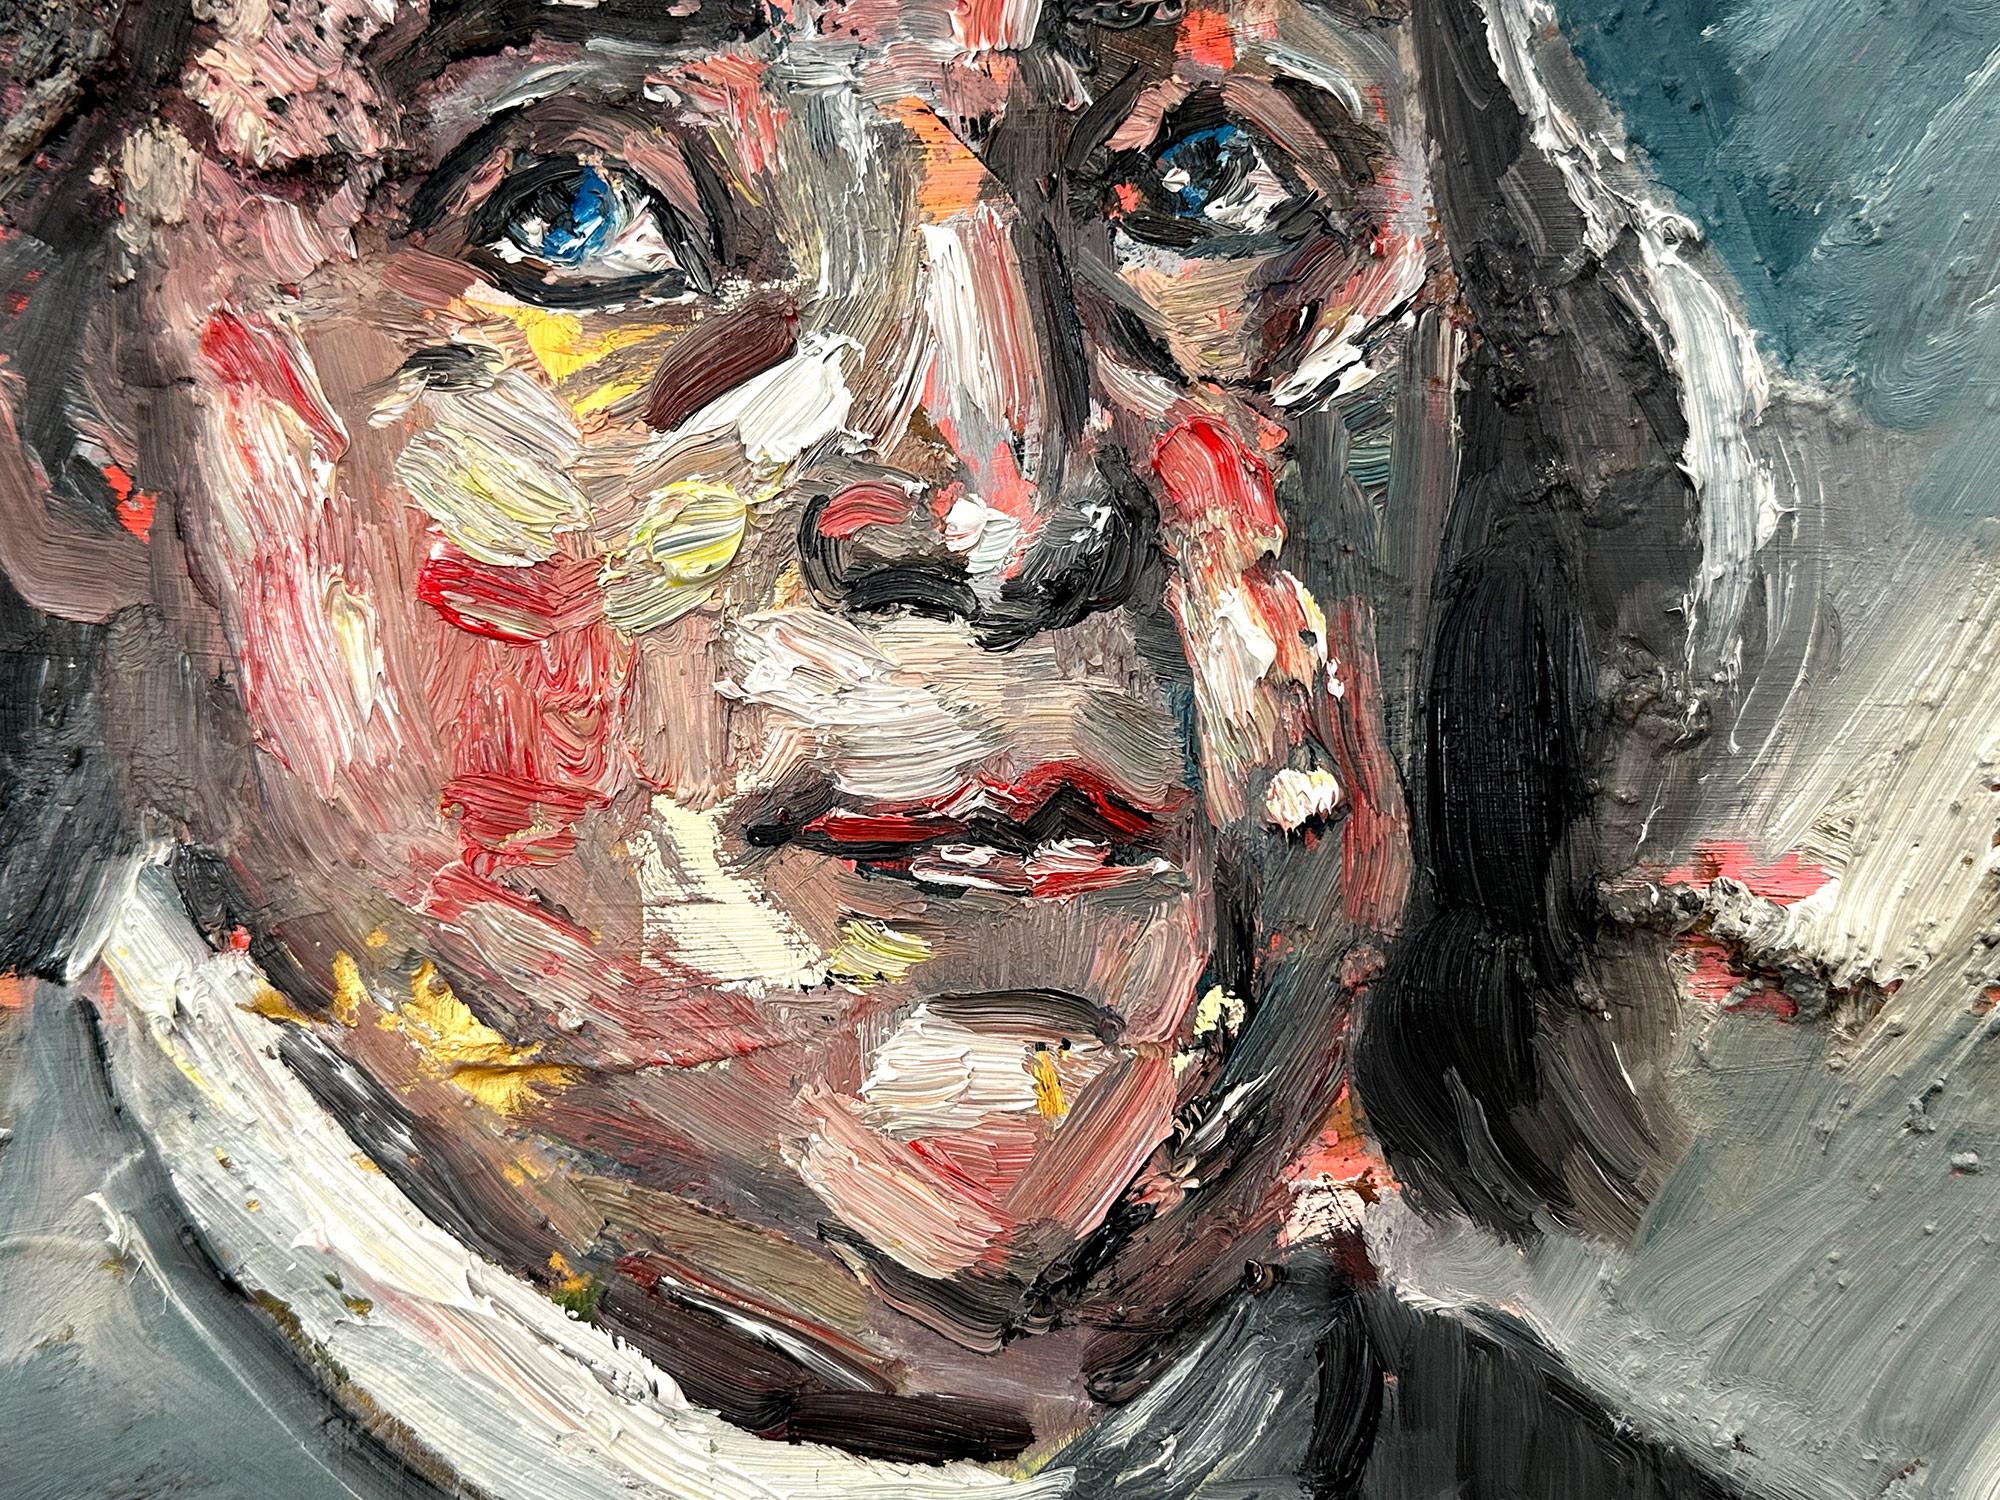 This painting depicts an impressionistic and abstract portrait of Benjamin Franklin. The thick brush strokes and fun marks creates an atmosphere reminiscent of the impressionists from the 20th Century. We can feel the moment in time effortlessly.